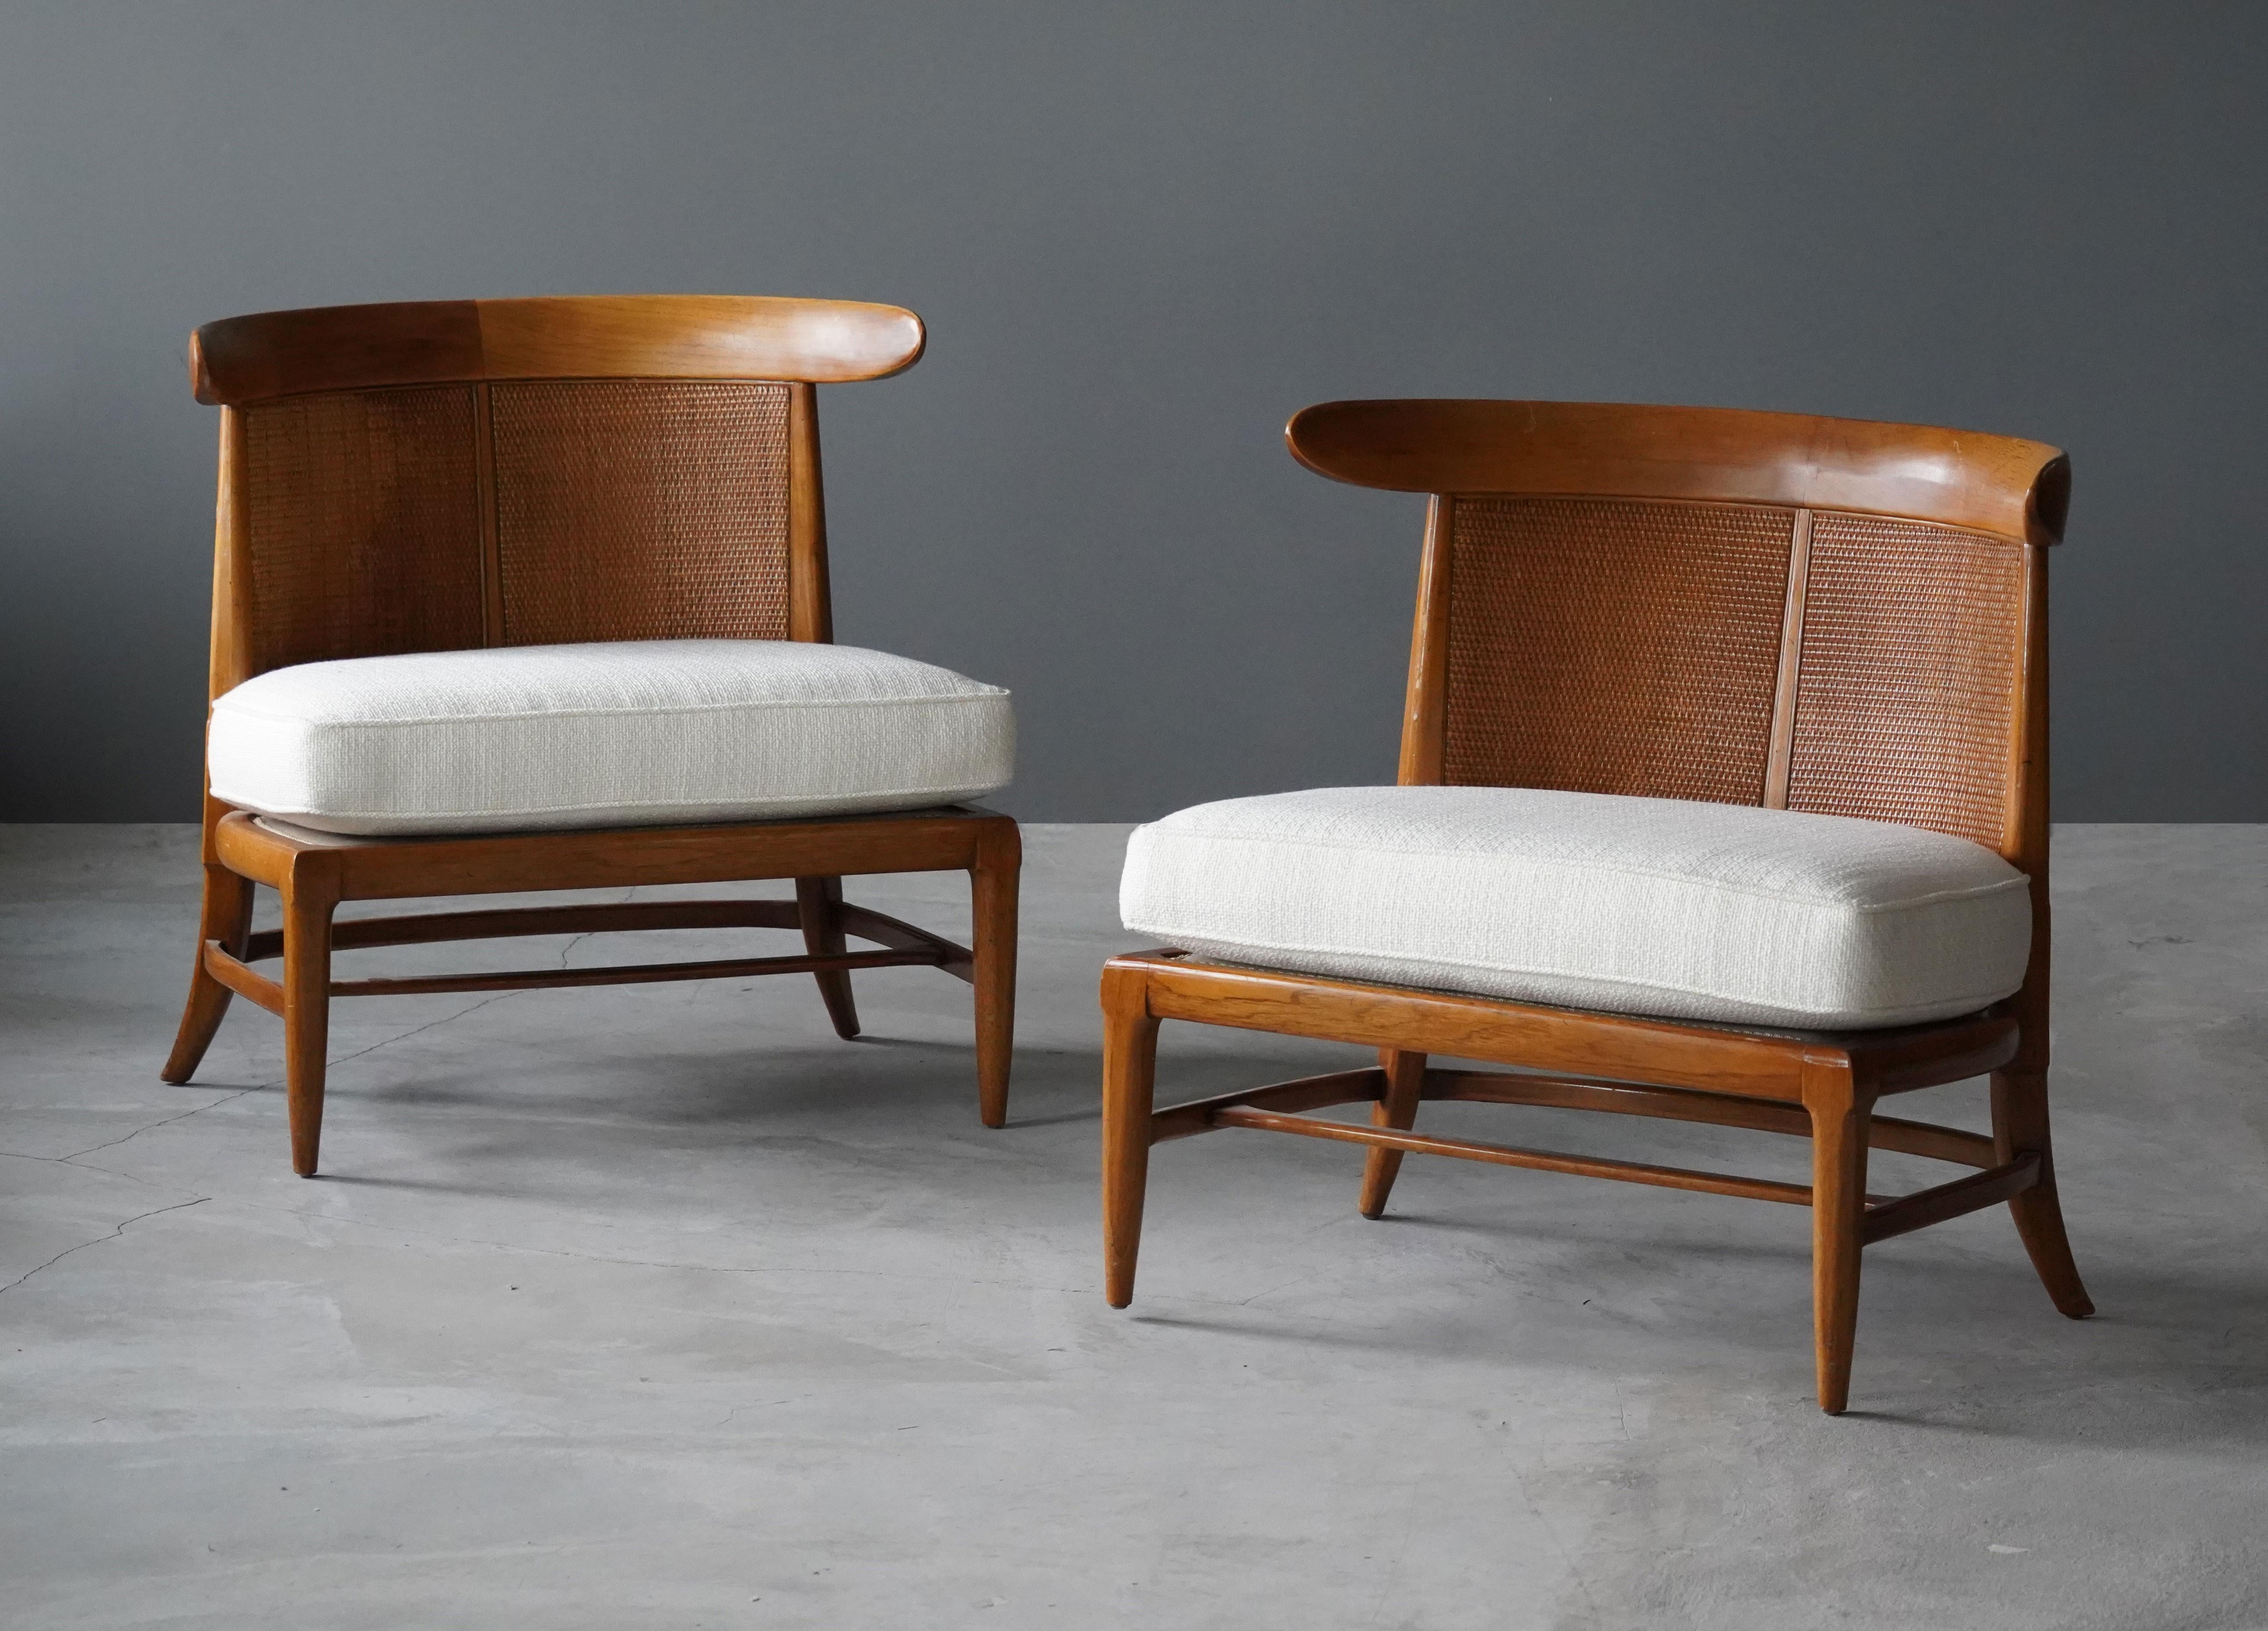 A pair of walnut lounge chairs with original cane or rattan braided backs and fabric cushions. Designed by John Lubberts & Lambert Mulder for Tomlinson collection, America, circa 1950.

Other American designers of the era include Edward Wormley,